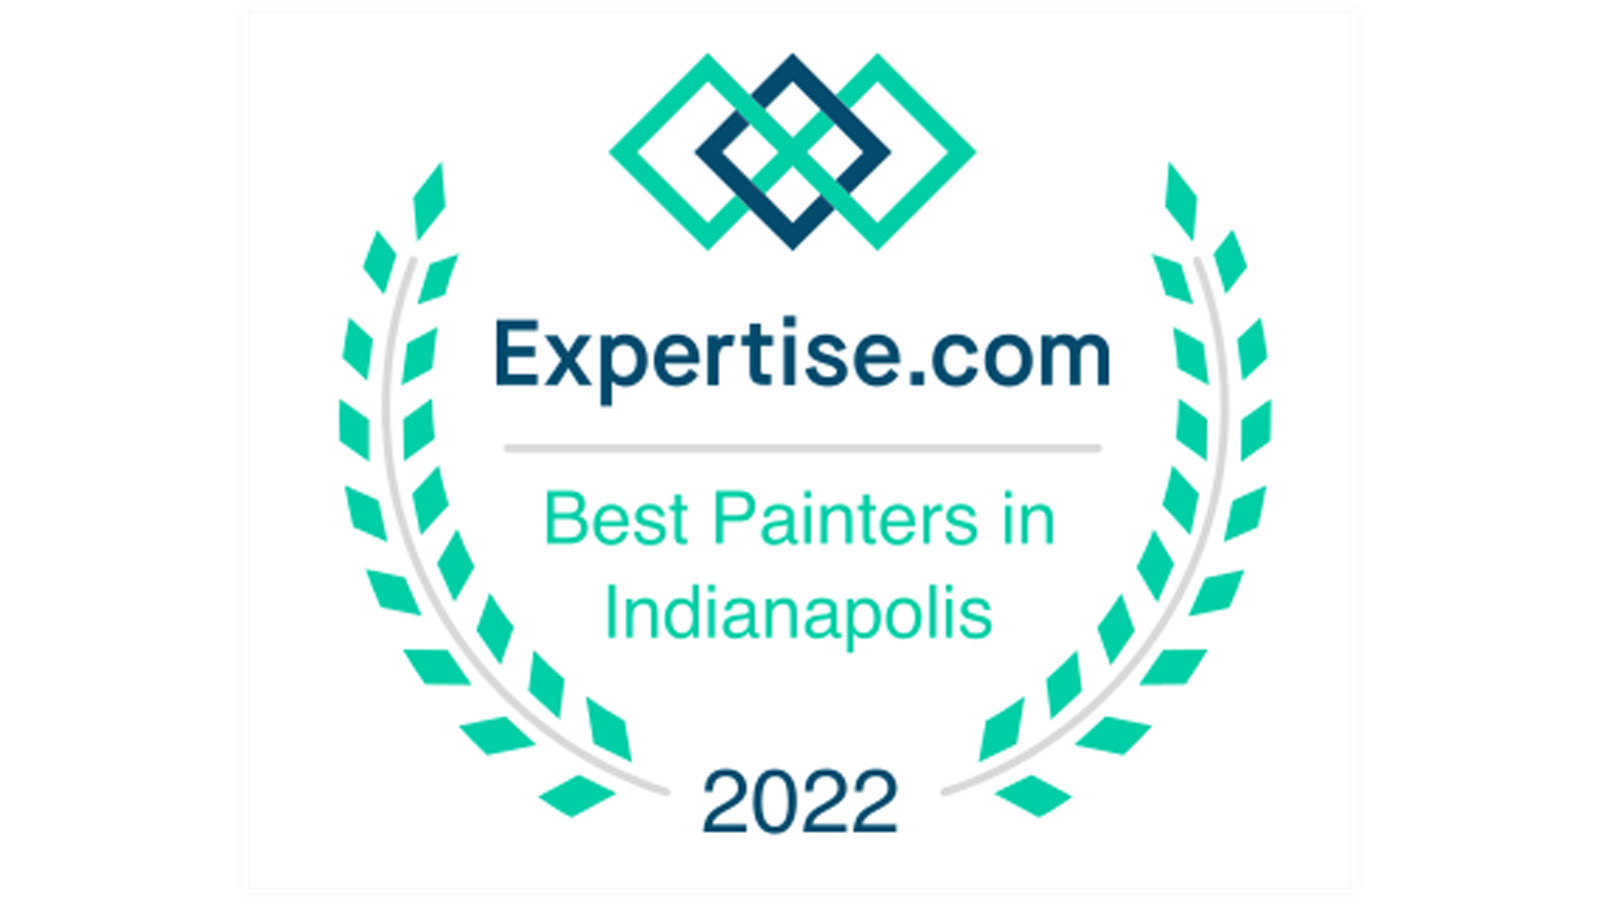 2022 Best Painters in Indianapolis – Voted by Expertise.com